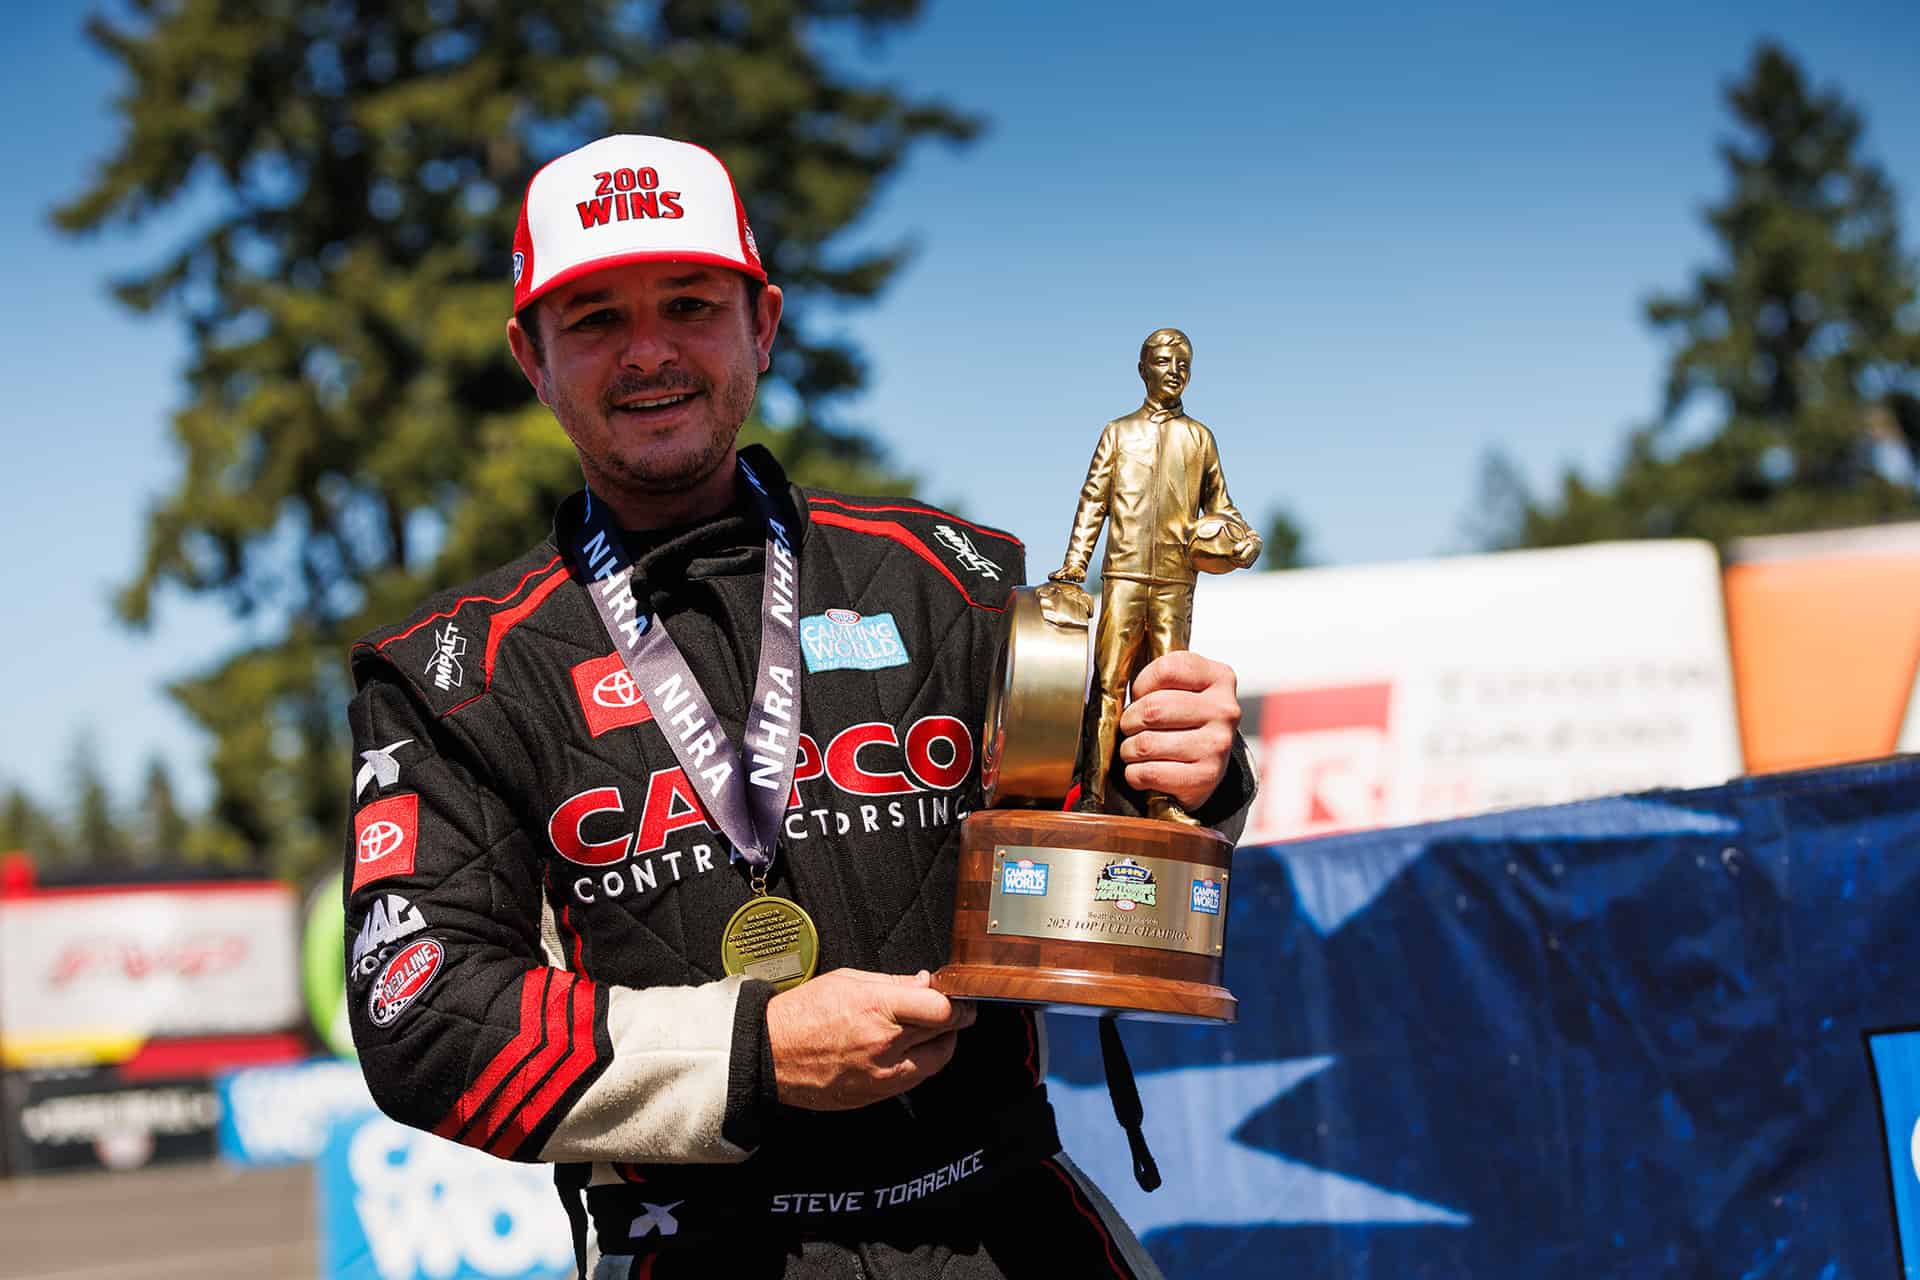 Steve Torrence ended his winless drought by winning in NHRA Top Fuel at the Flav-R-Pac Northwest Nationals in Seattle.